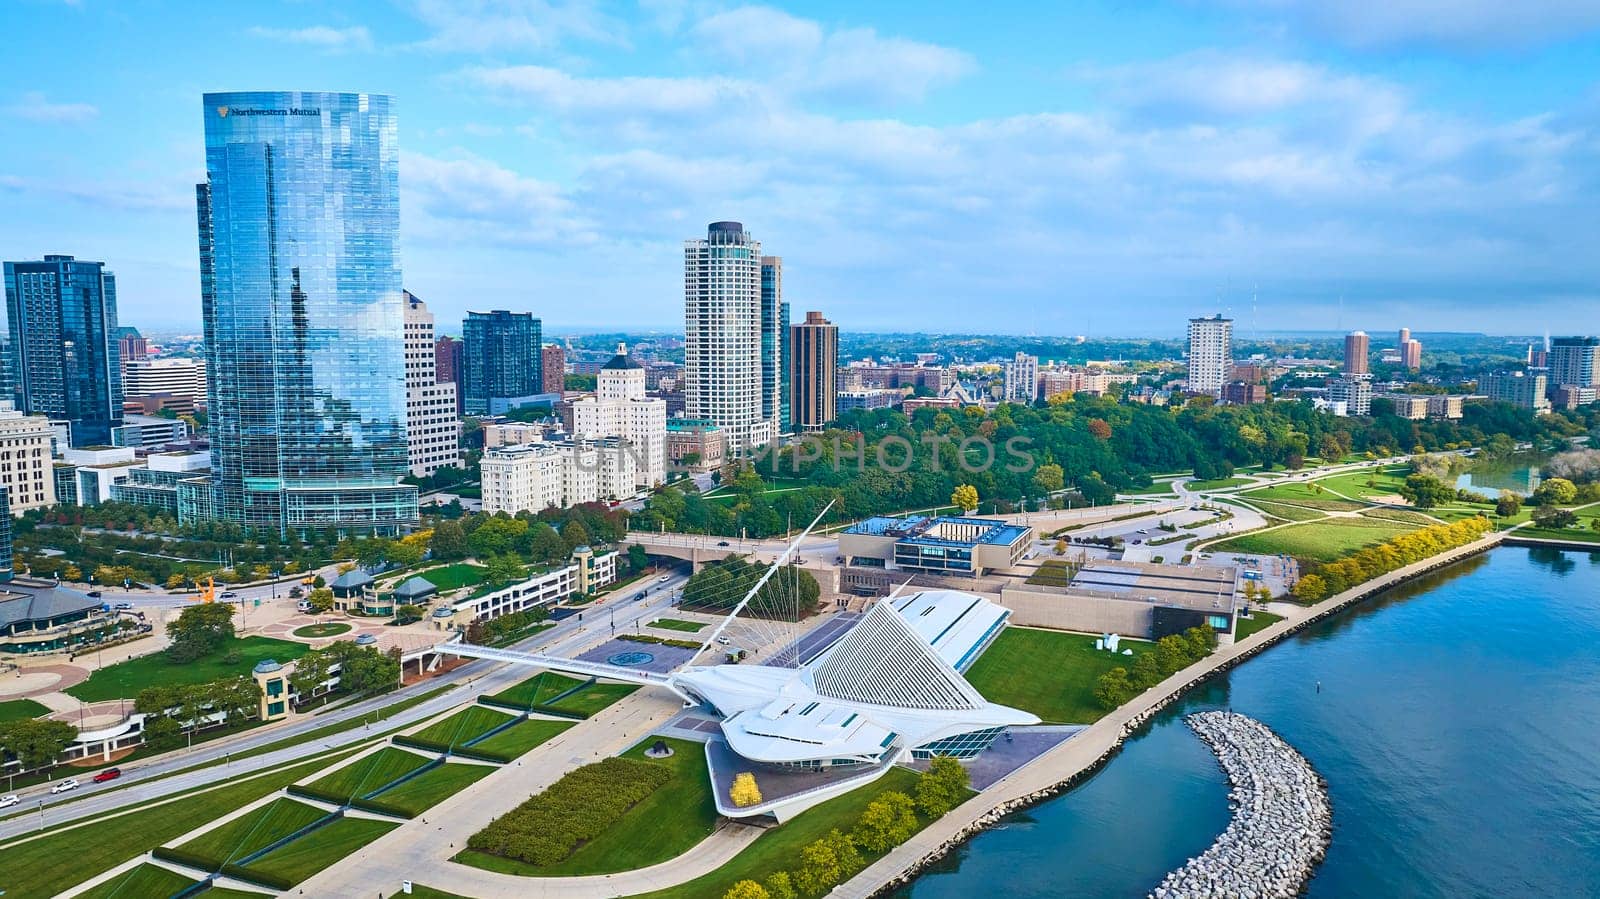 Vibrant aerial view of a modern cityscape featuring a glass skyscraper, the artistic Quadracci Pavilion in Milwaukee, and Lake Michigan, showcasing urban growth and sustainability